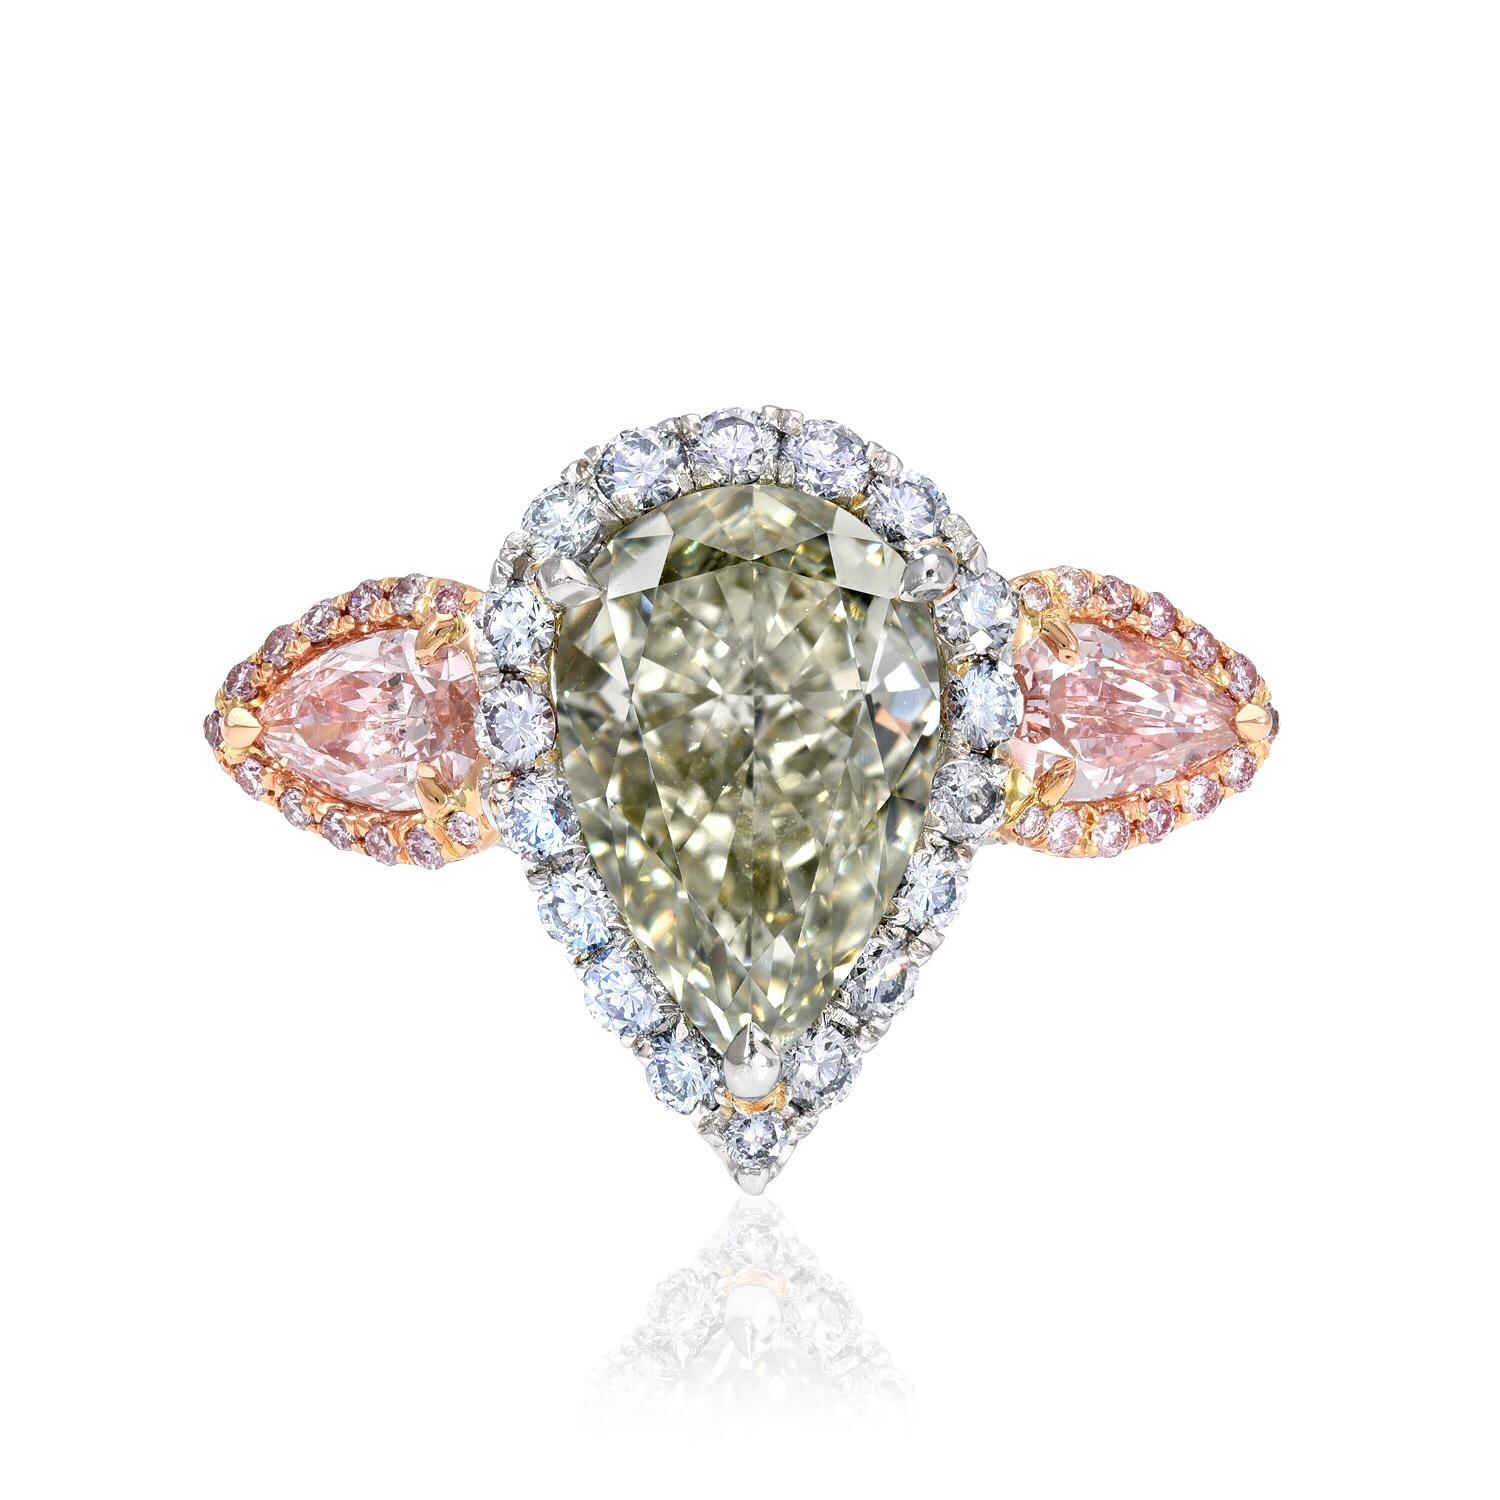 Ultra rare and exclusive 5.16 carat natural Fancy deep grayish yellowish Green pear shape diamond, VS2 clarity, surrounded by natural Fancy Blue round brilliant diamonds, flanked by a pair of natural Fancy Pink diamond pear shapes weighing a total